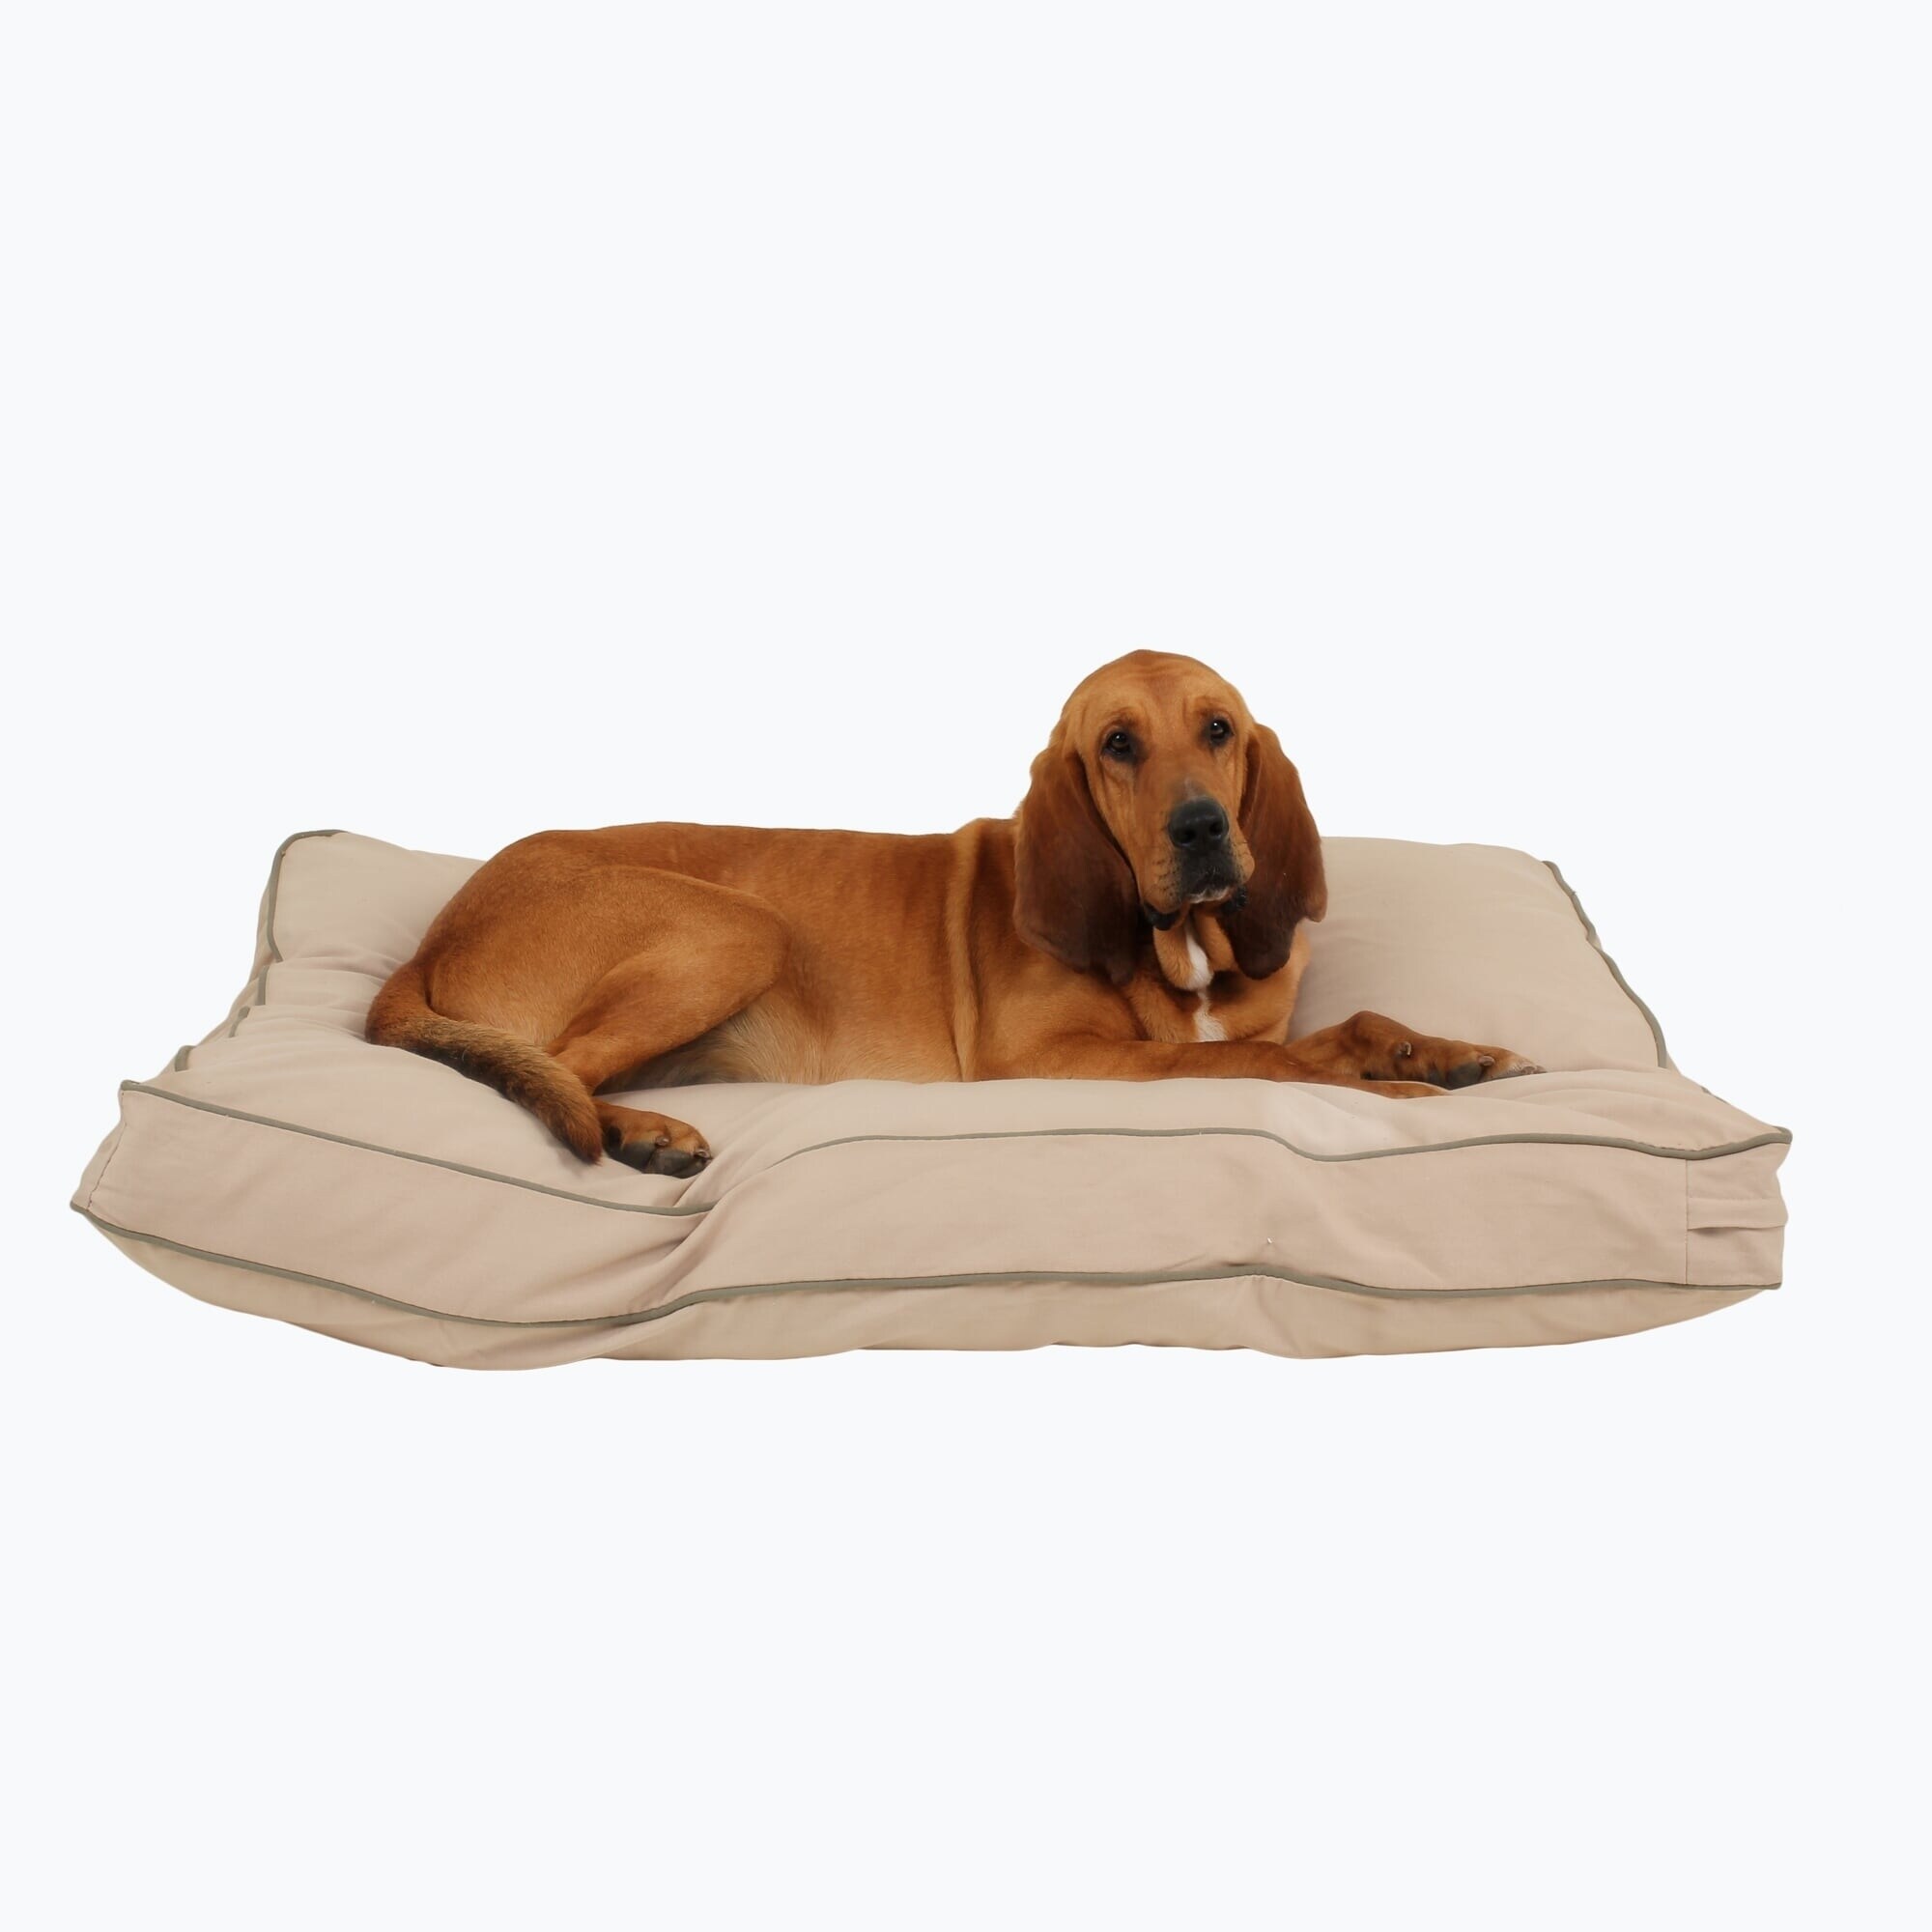 Carolina Pet Company Large Red Indoor/Outdoor Striped Jamison Bed